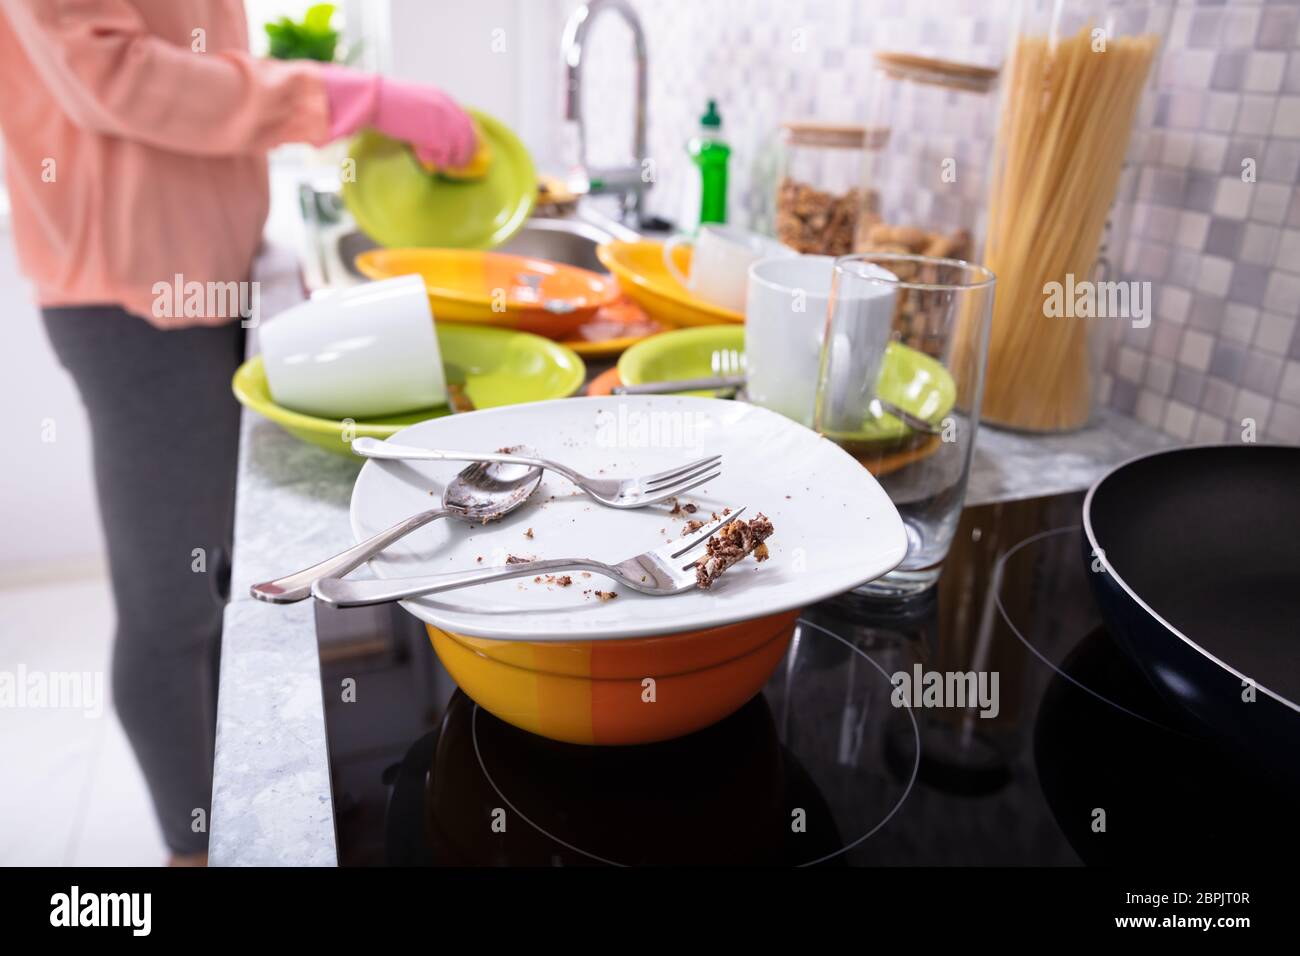 Close-up Of A Woman Washing Dishware With Sponge And Utensil On Kitchen Counter Stock Photo